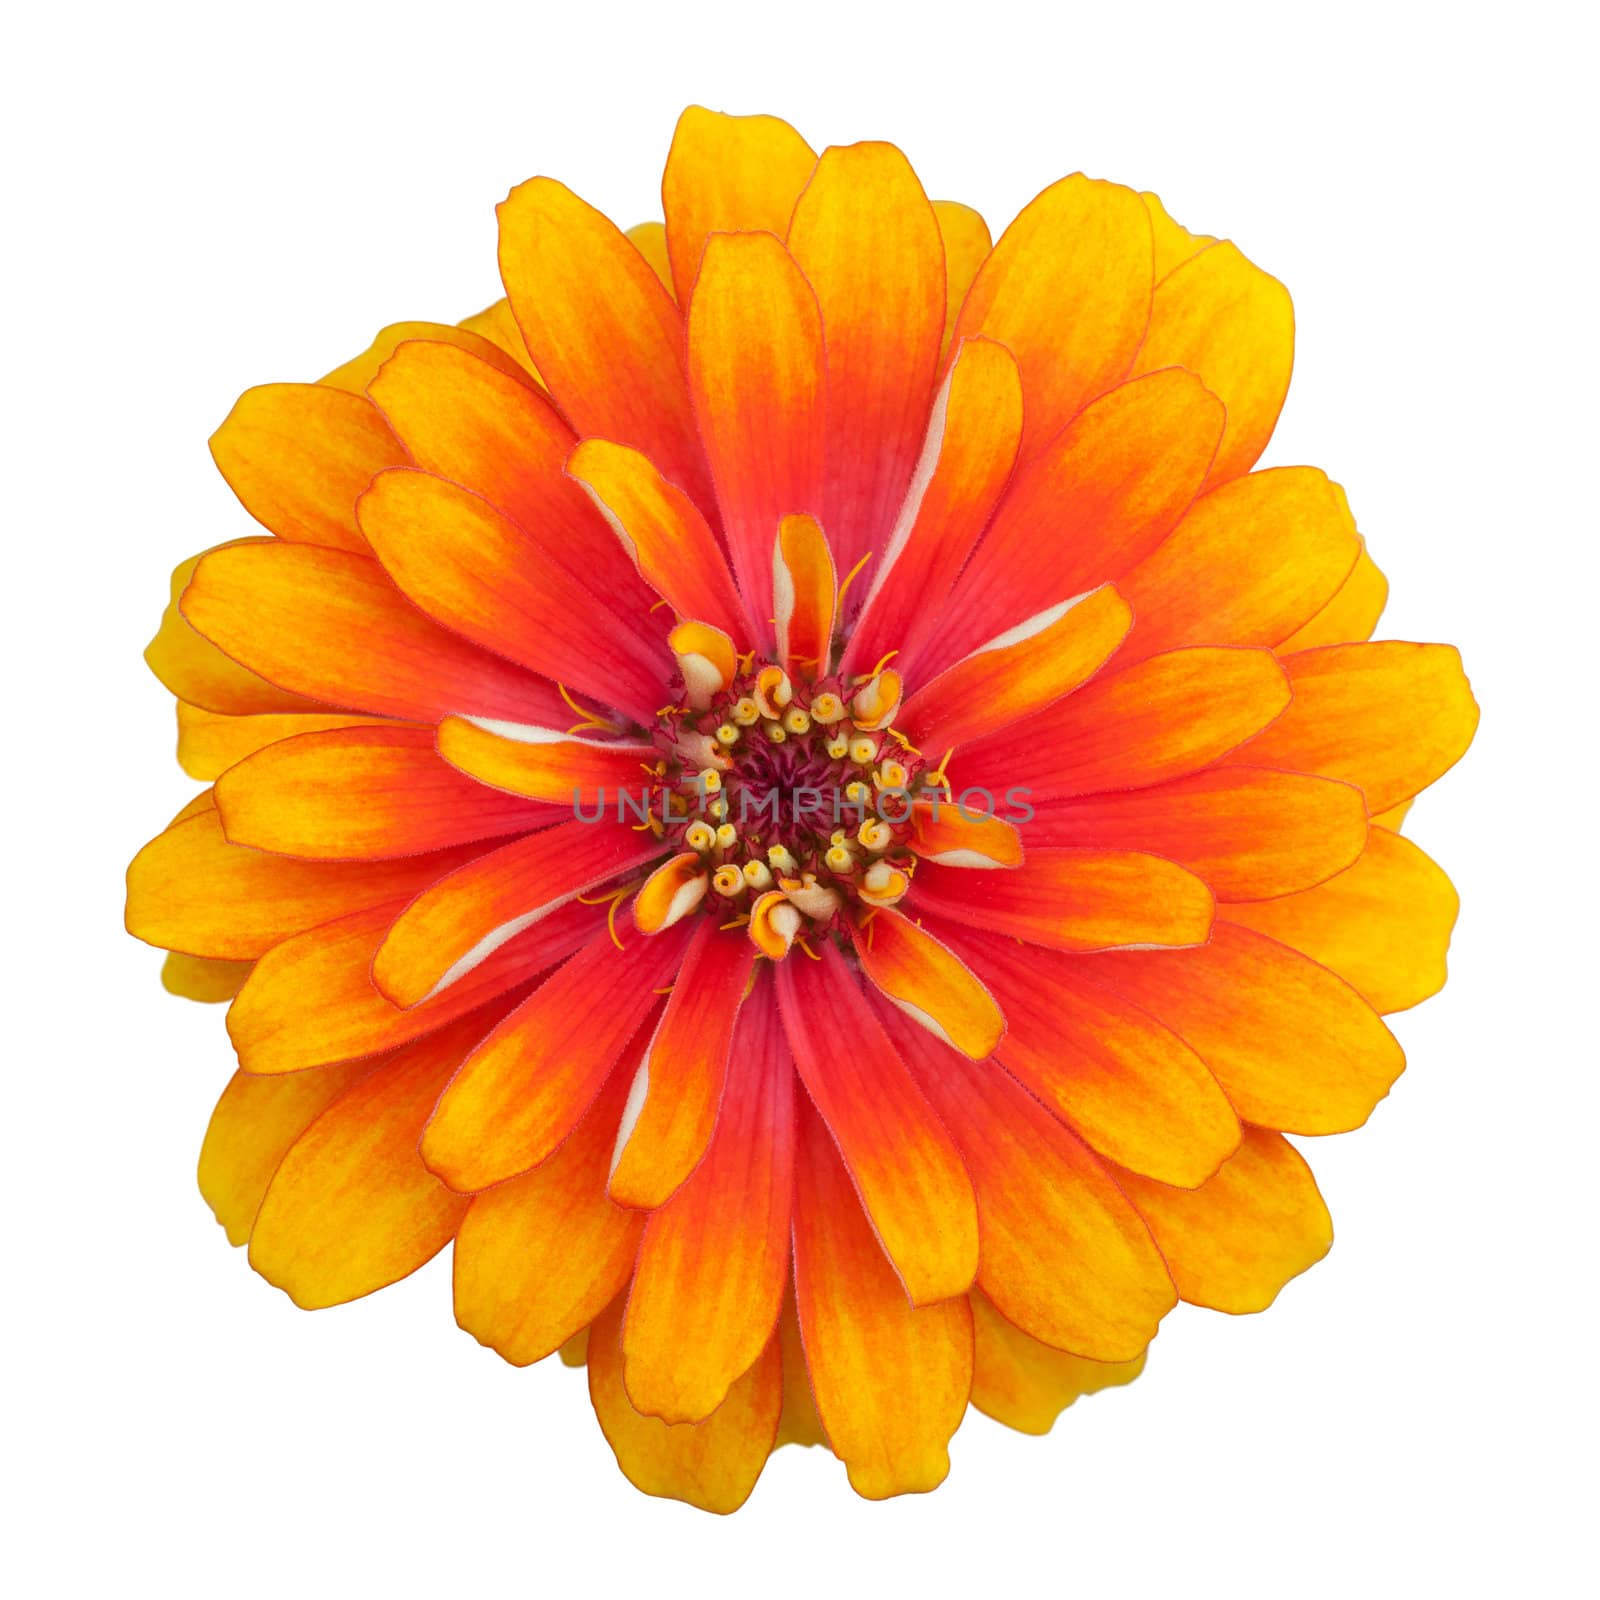 Zinnia flower isolated on white background by foto76